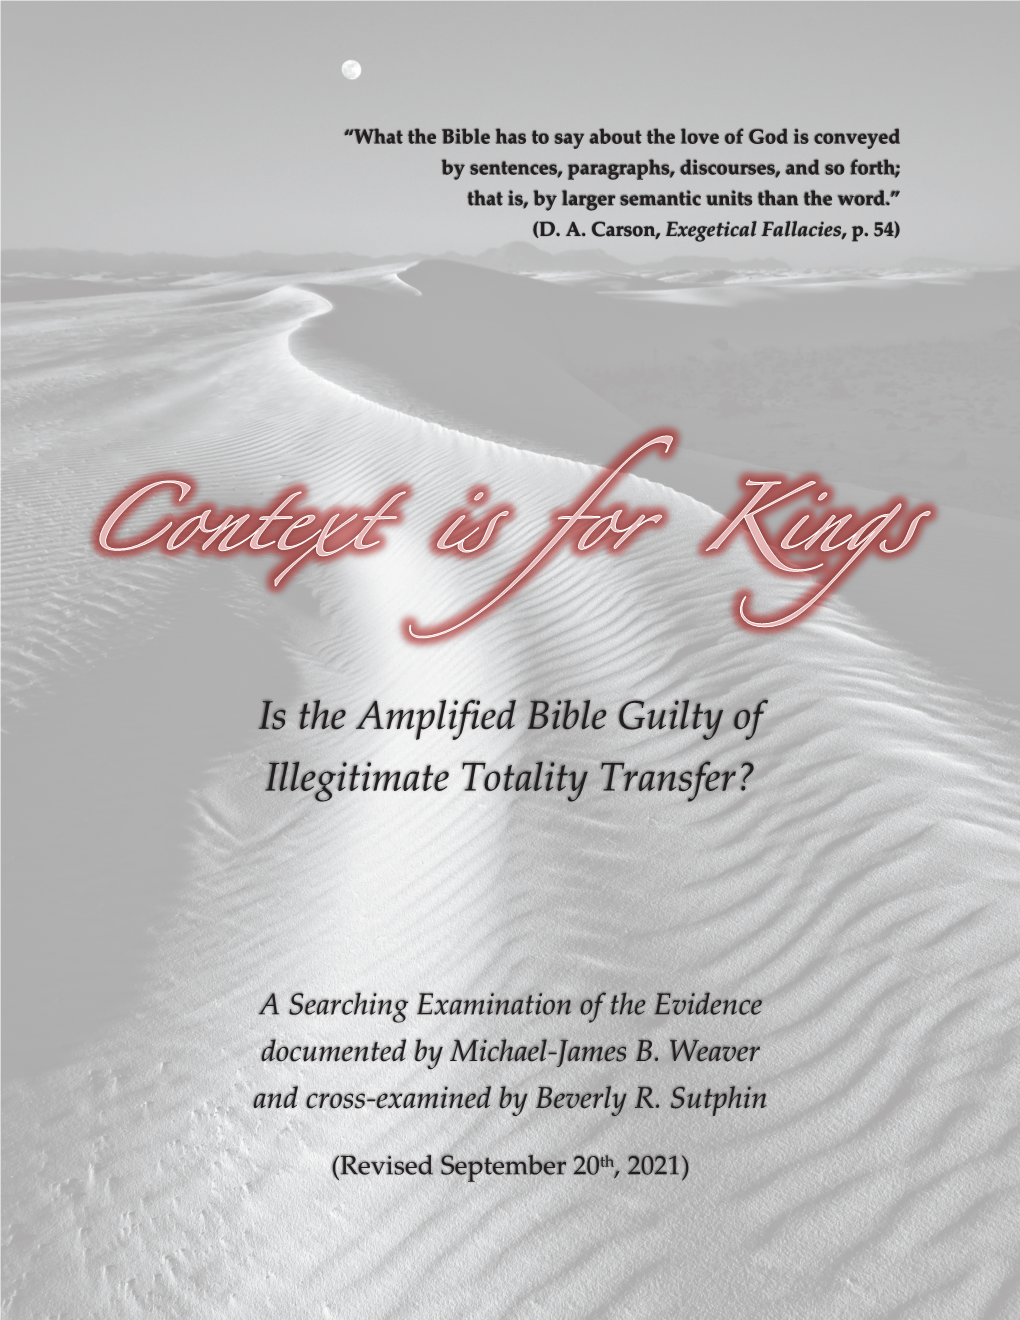 Is the Amplified Bible Guilty of Illegitimate Totality Transfer?